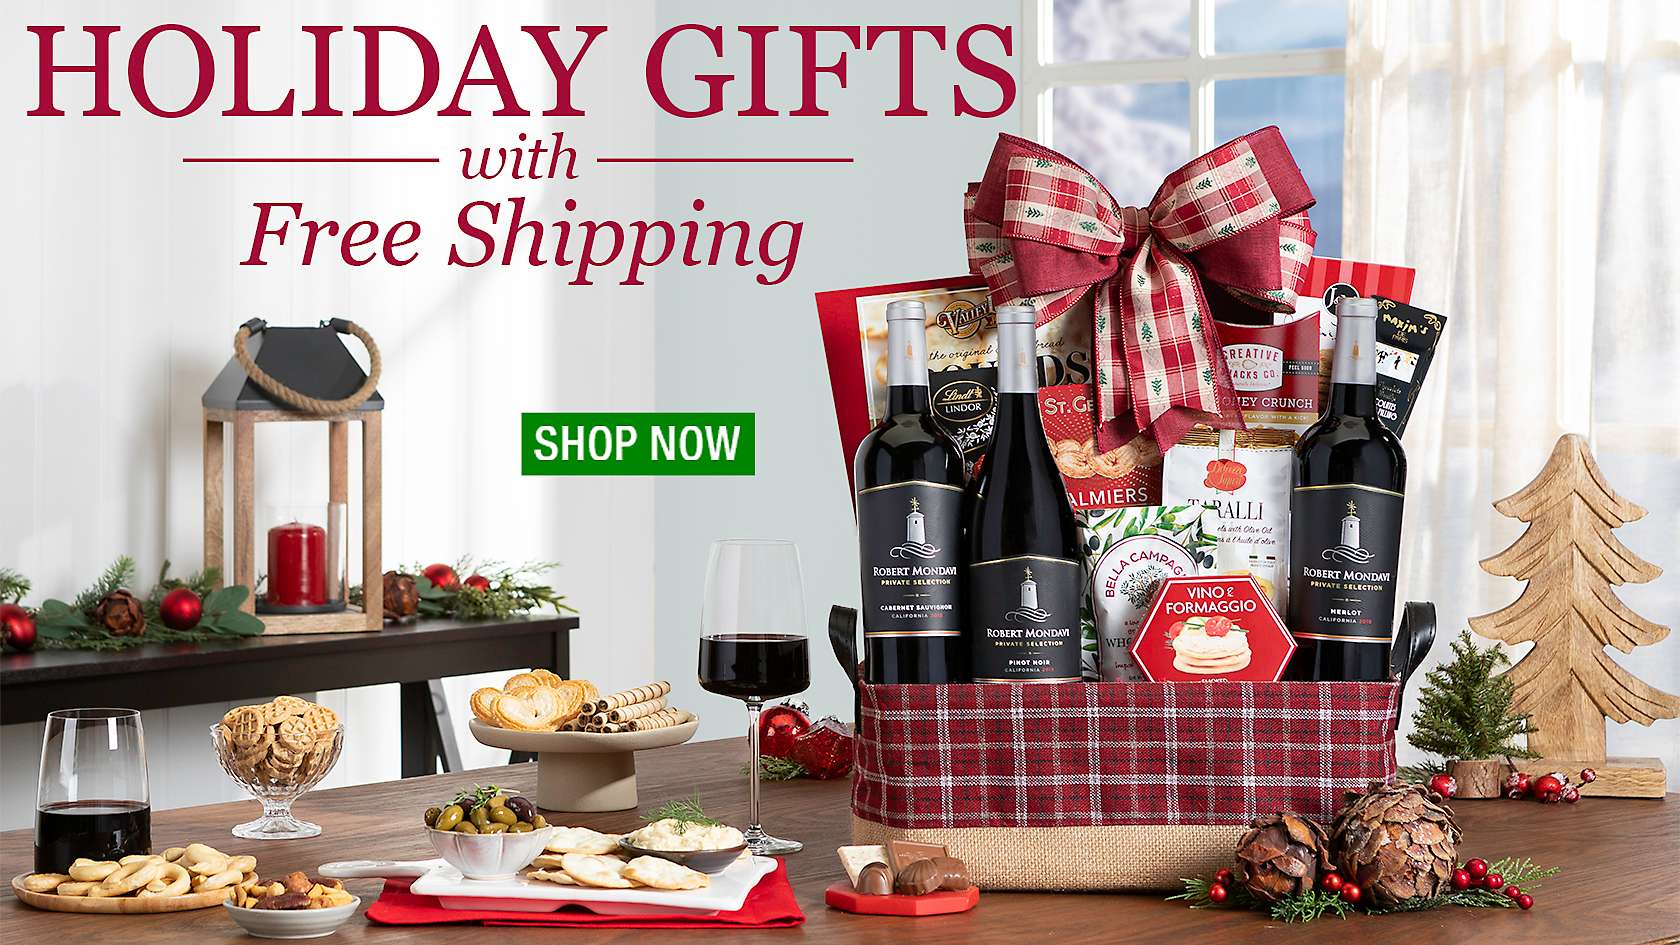 Holiday gifts with free shipping